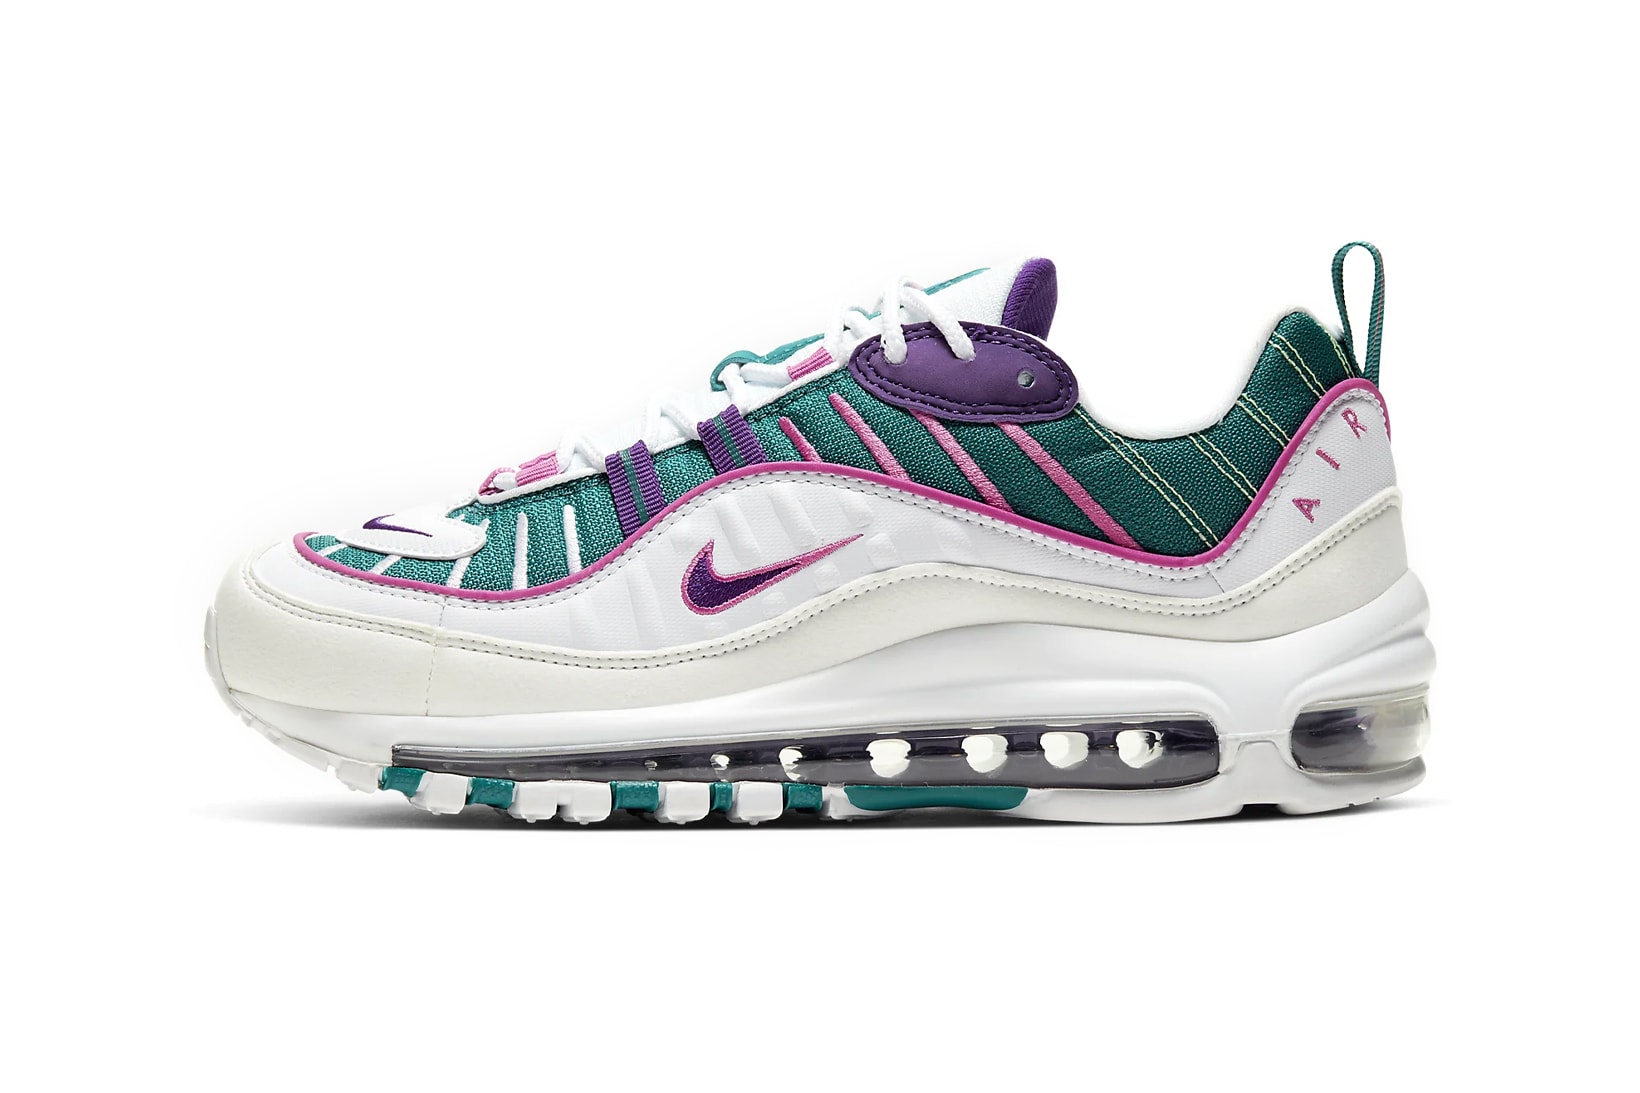 nike air max 98 bright spruce voltage purple green pink womens sneakers 